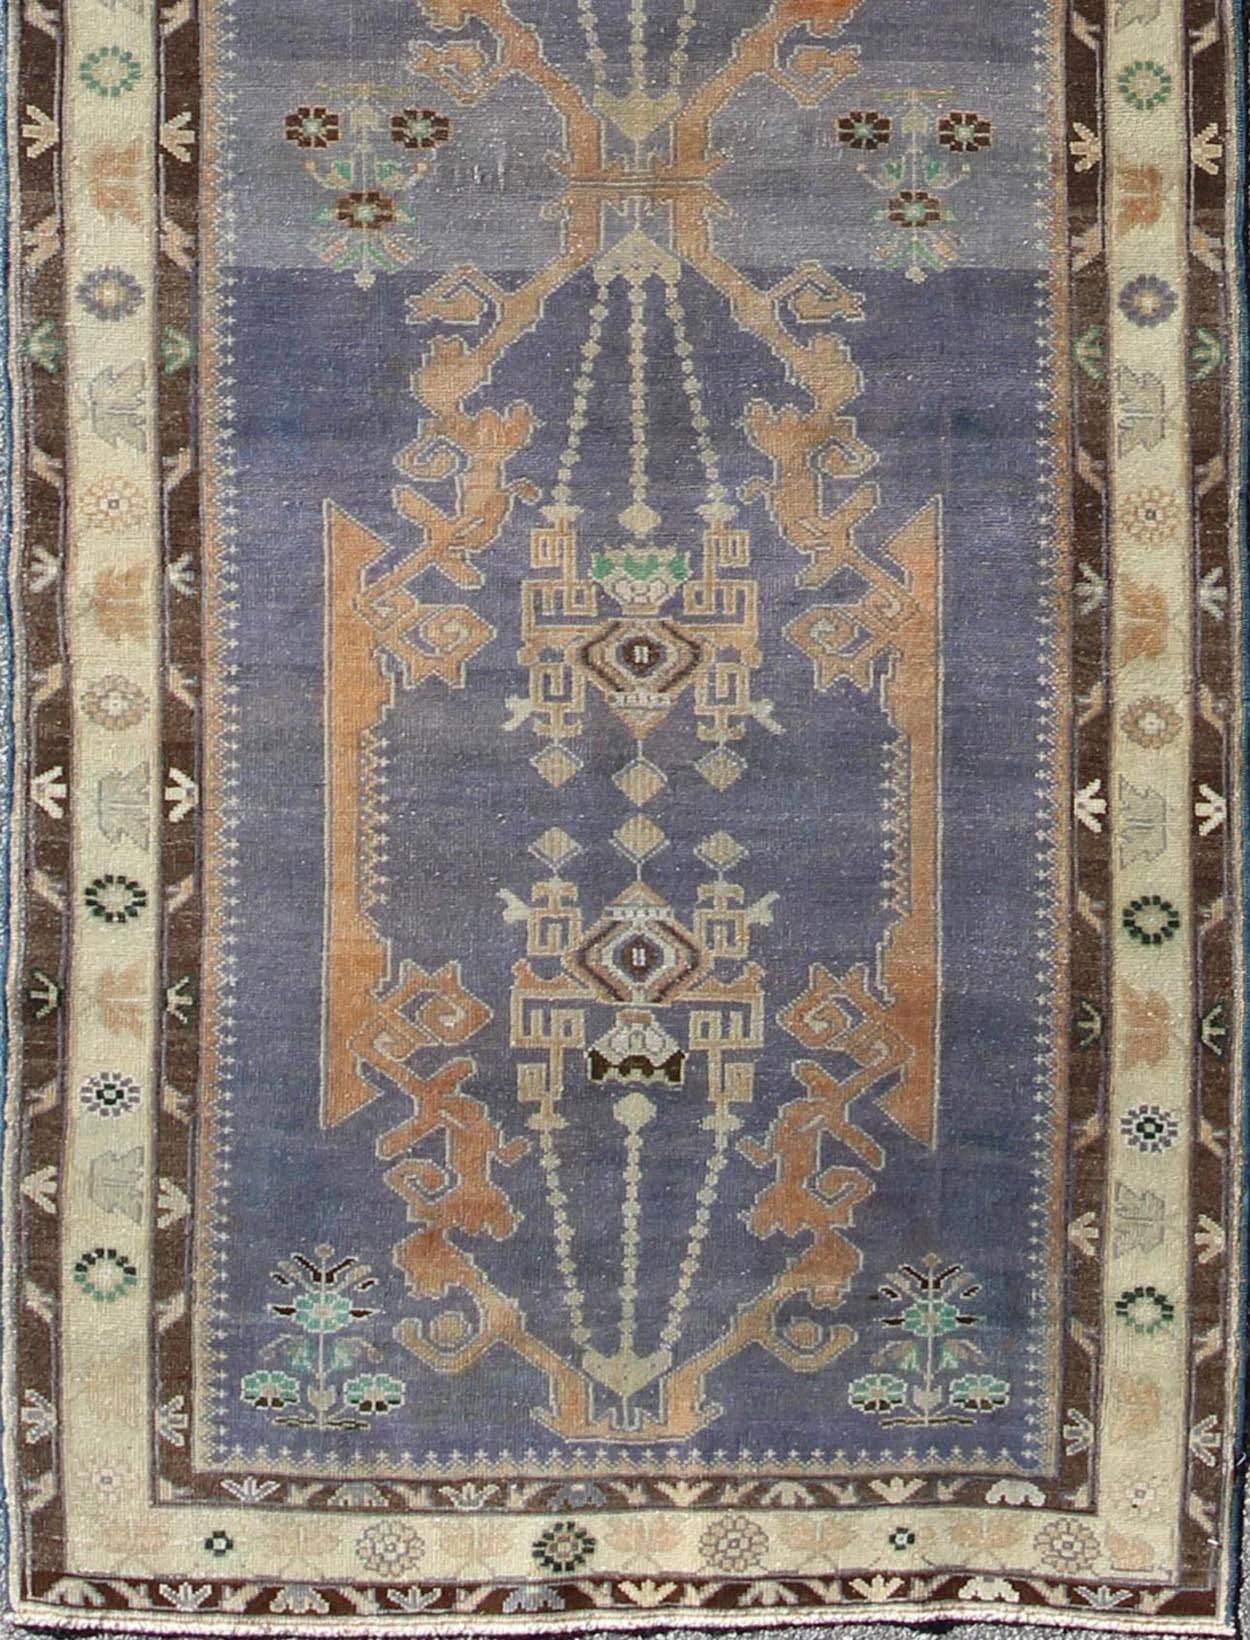 Long Vintage Sivas Runner in Elegant Purple and Brown
Bold in design and delicate in colors, this very unique long Turkish Sivas runner rests on a light purple background with three medallions in the center. An ivory main border and two smaller